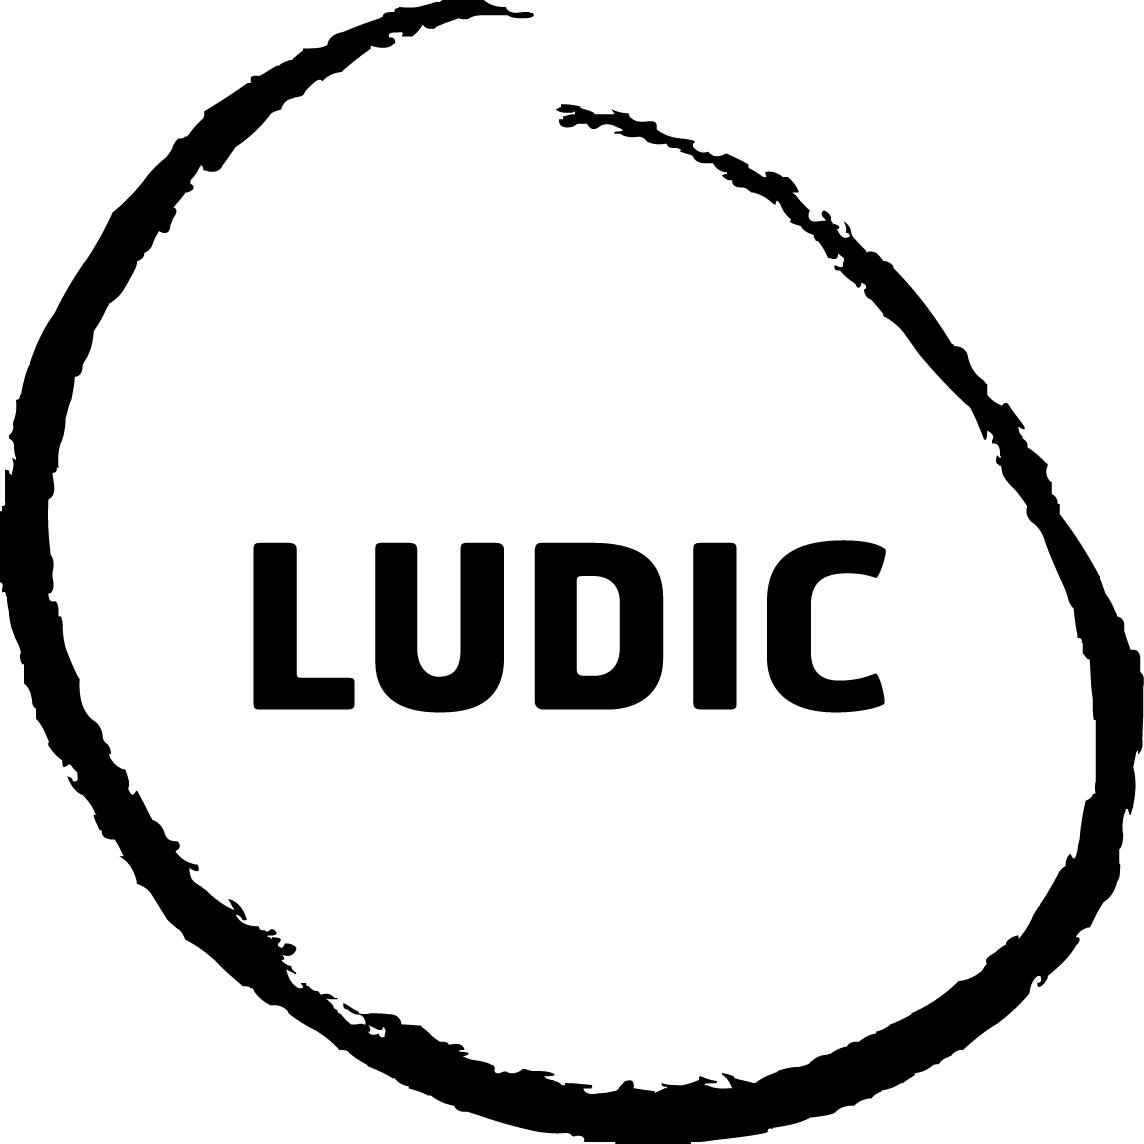 LUDIC_LOGO_BLACK_new Services: Finance Transformation - Ludic Consulting